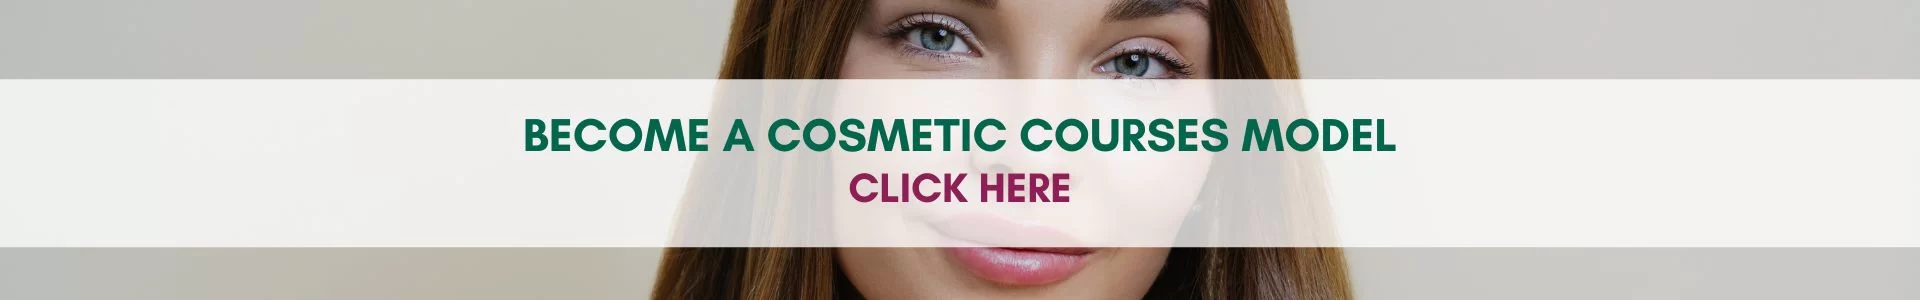 BECOME A COSMETIC COURSES MODEL